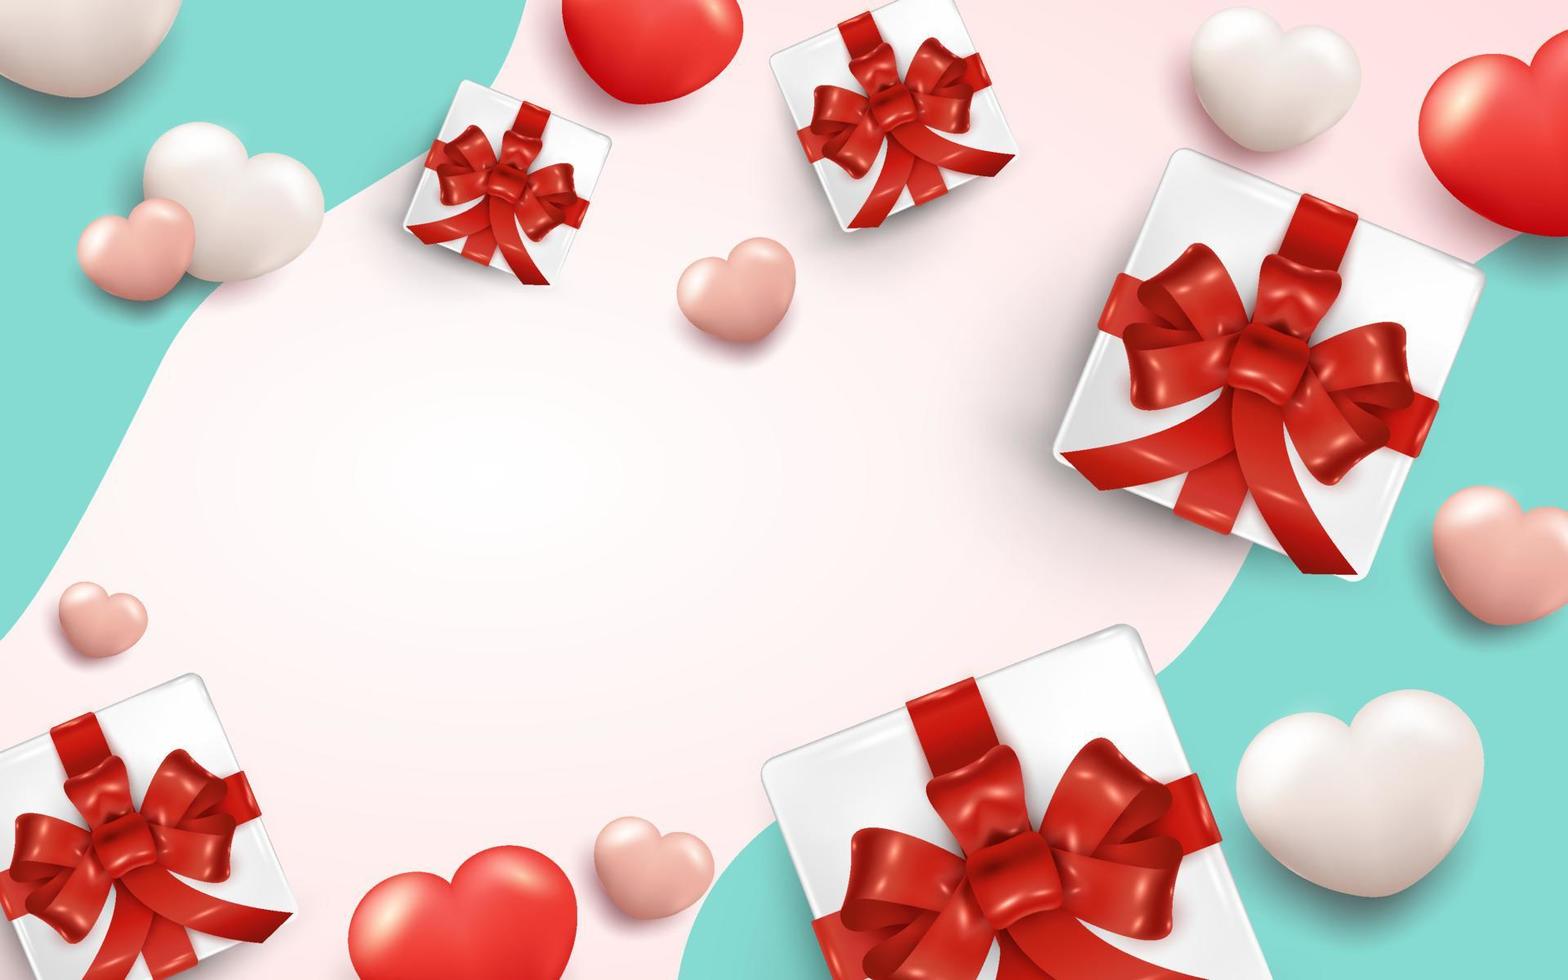 Valentines Day Background with Gift Box Ornaments and Cute Hearts vector